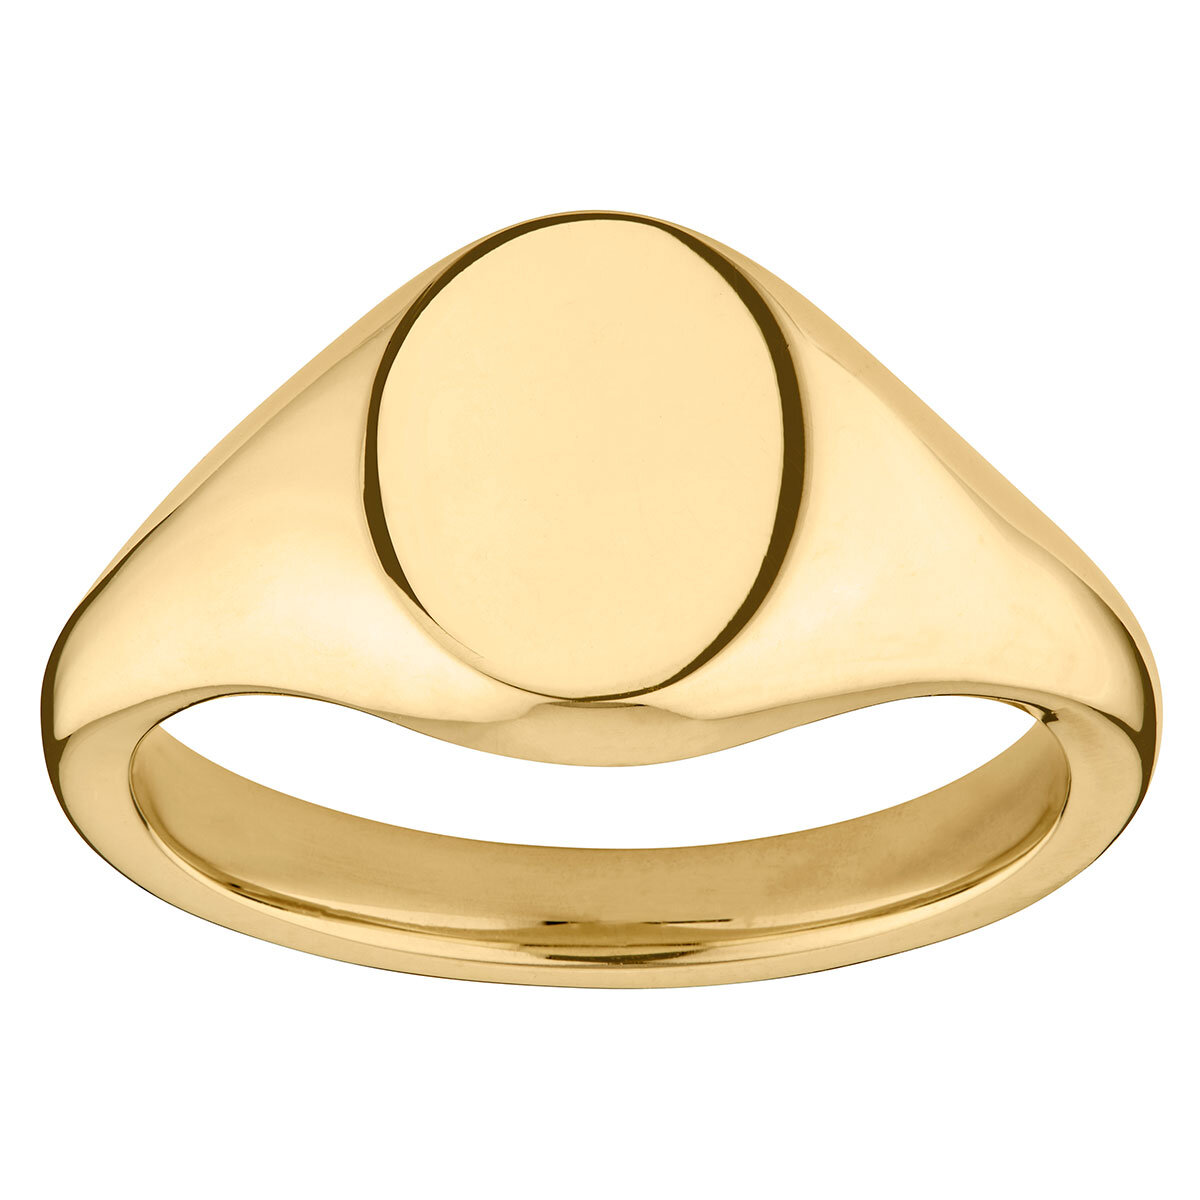 Oval Signet Ring, 18ct Yellow Gold Costco UK